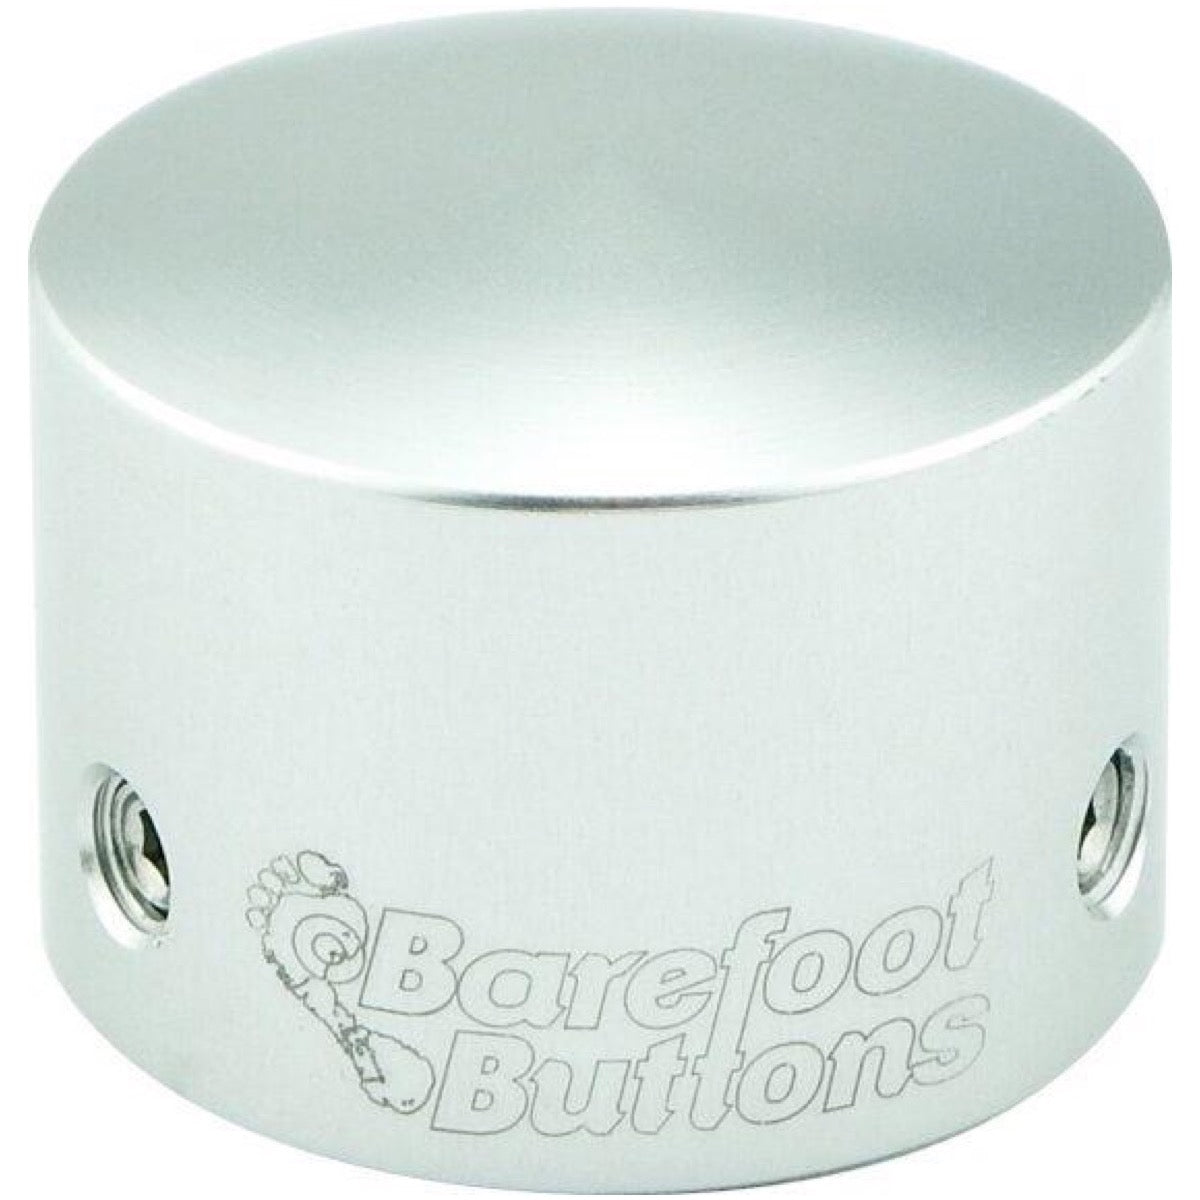 Barefoot Buttons Version 1 Tallboy, Silver